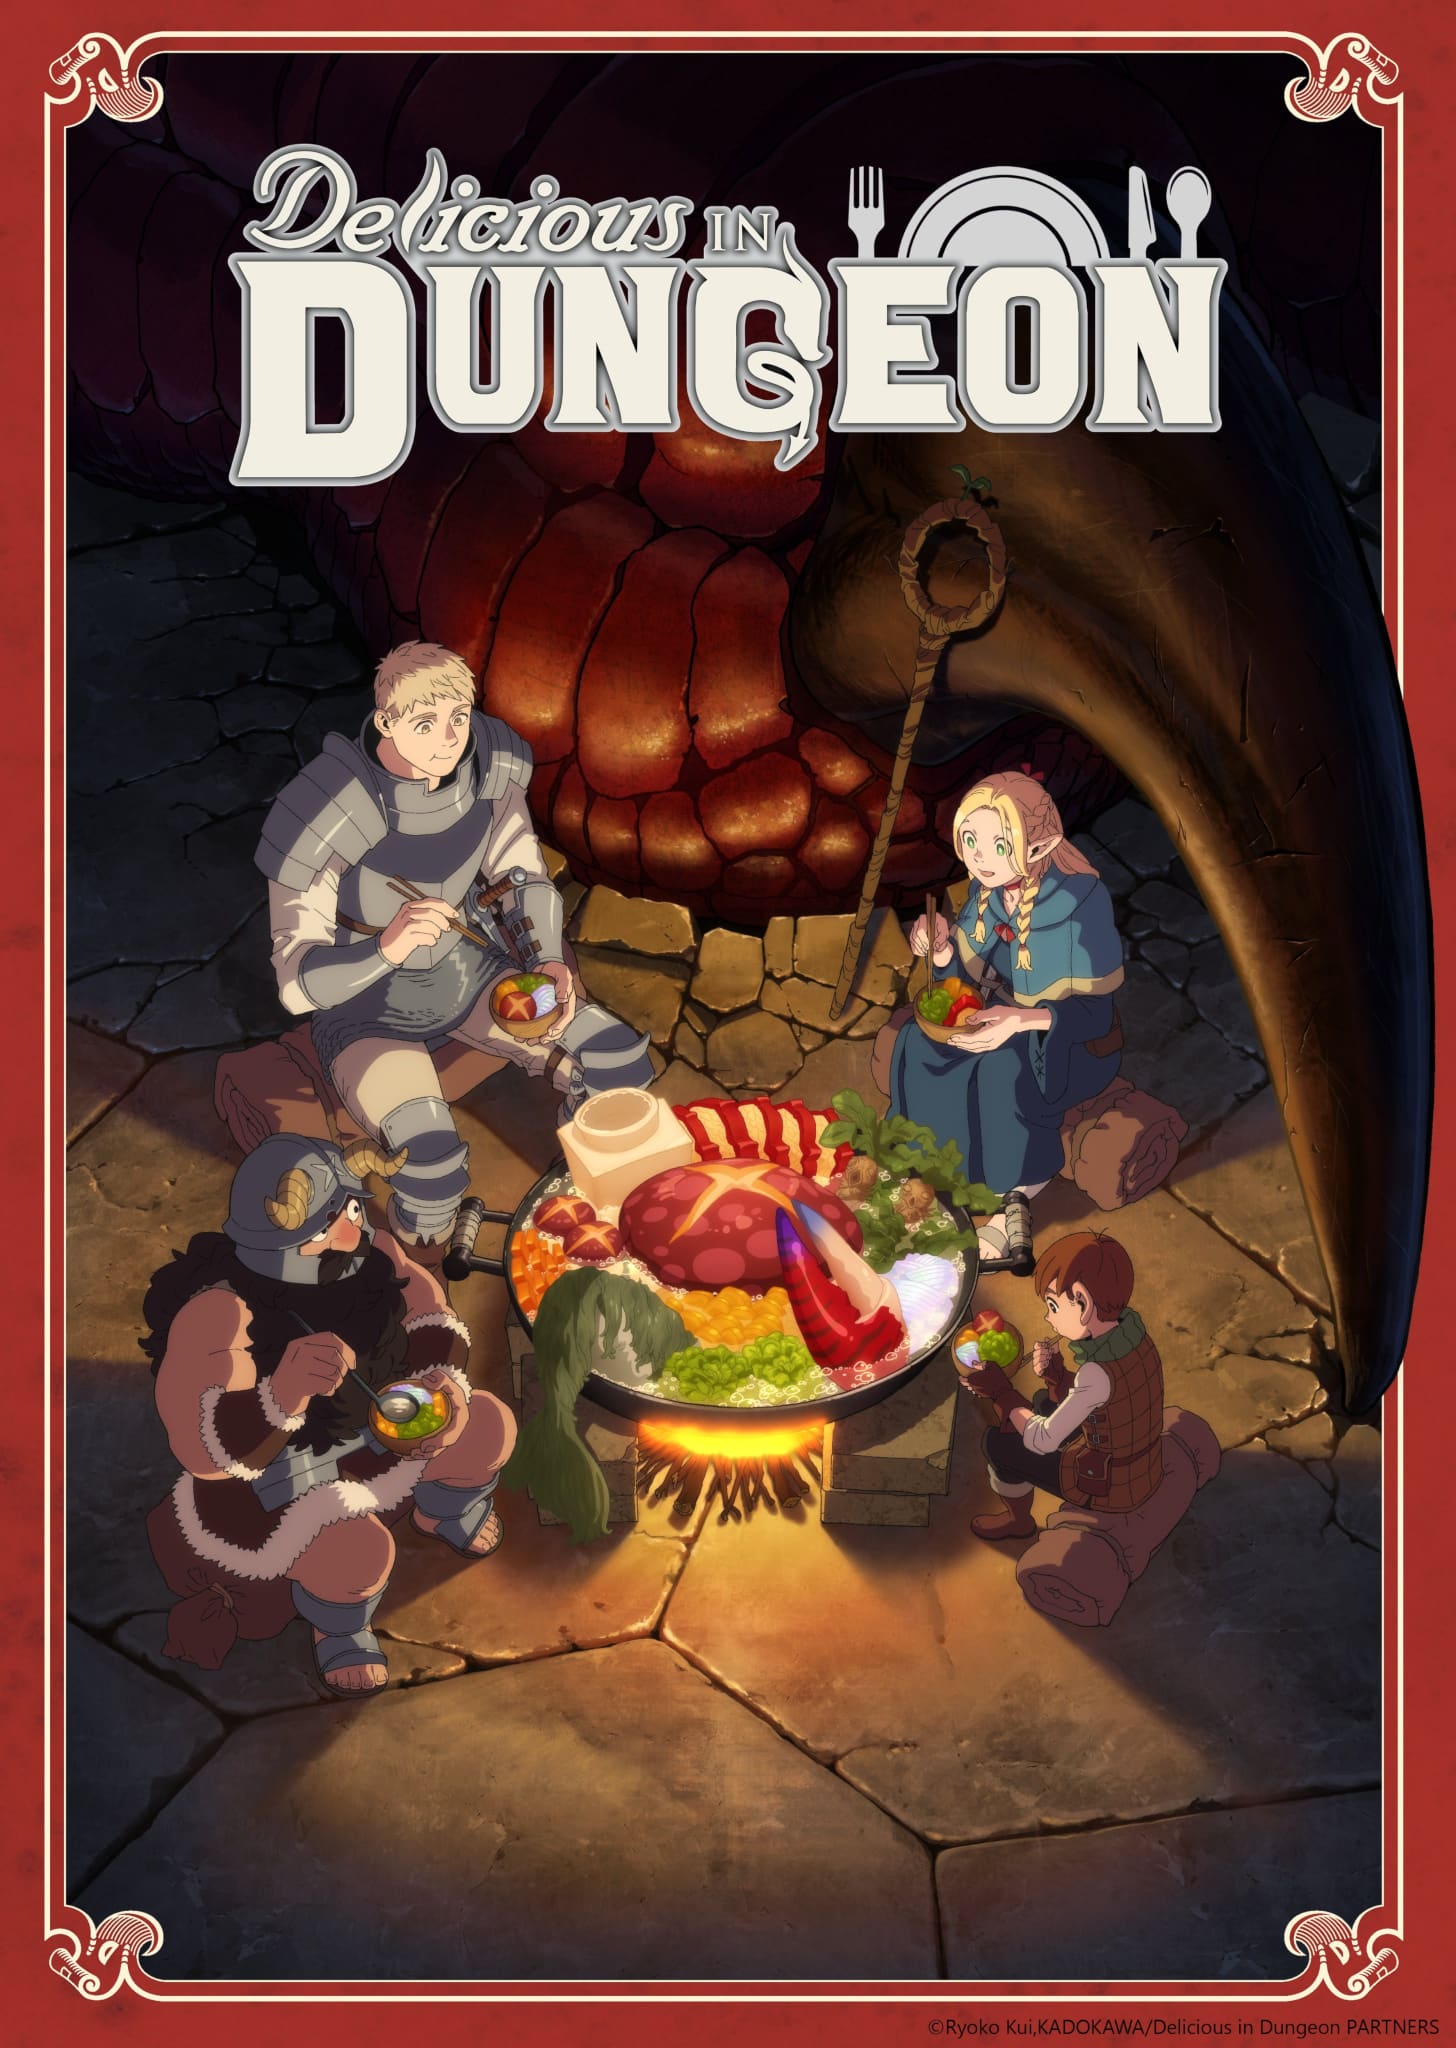 Second visuel pour lanime Delicious in Dungeon